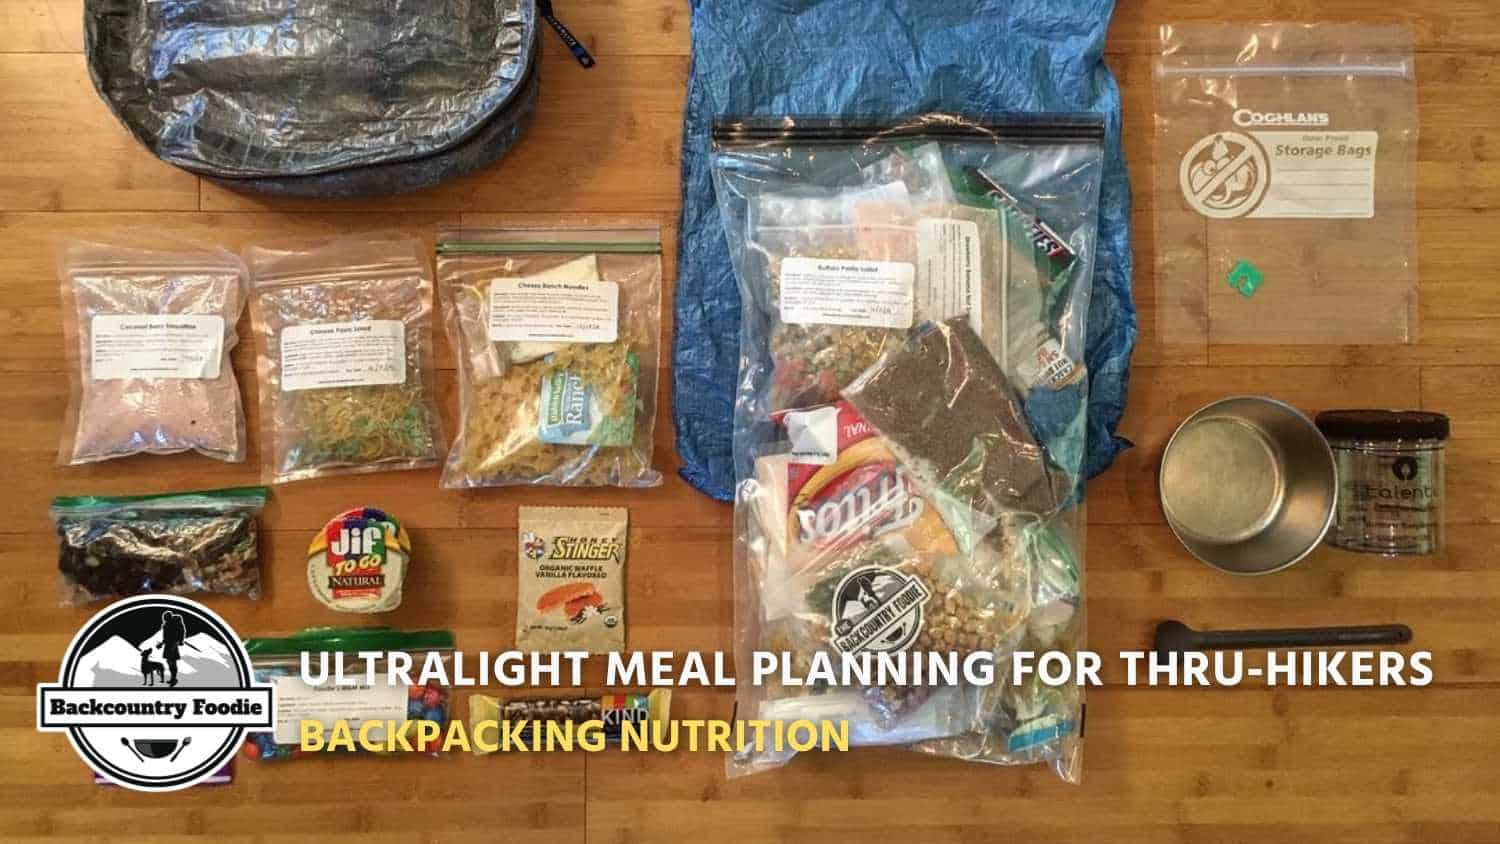 Backcountry Foodie Blog Ultralight Meal Planning for Thru Hikers Backpacking Nutrition